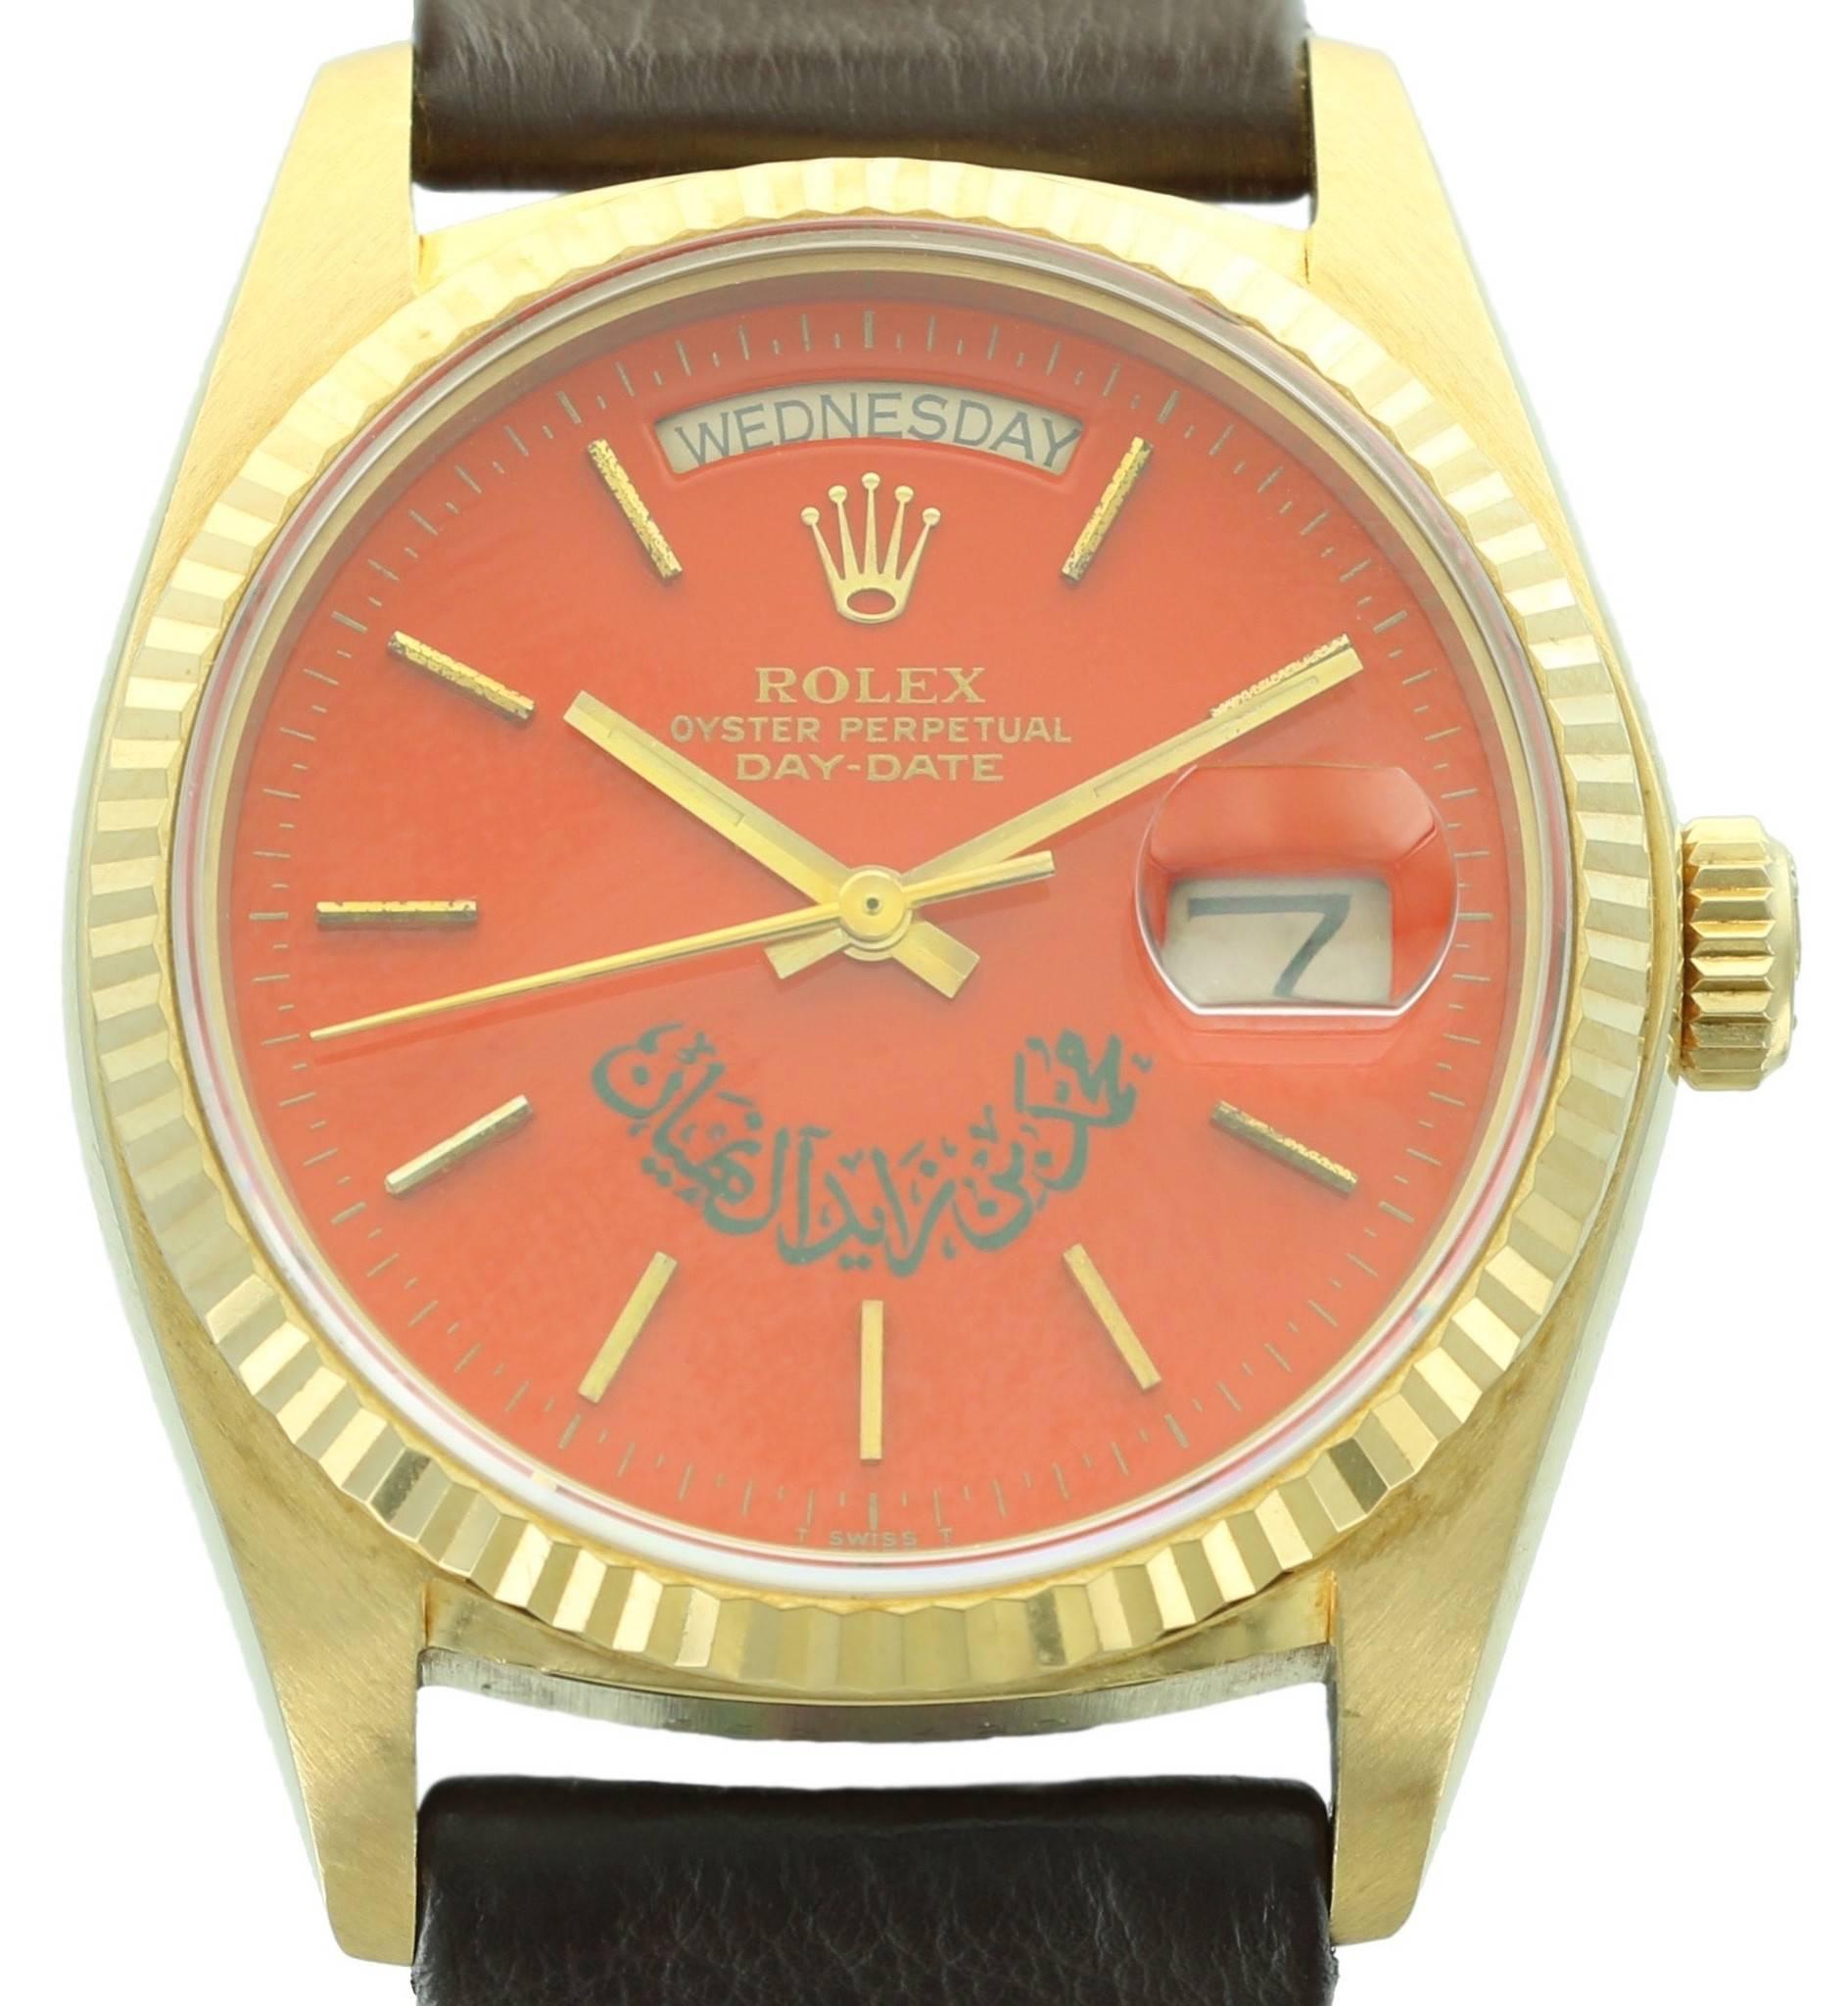 This extremely rare Rolex Day-Date, ref. 18038 features one of the most unusual dials we have ever seen. It is a rich, reddish-orange Stella dial with writing that we have translated to be the name of the Mohammed Bin Zayed Al Nahyan, the crown